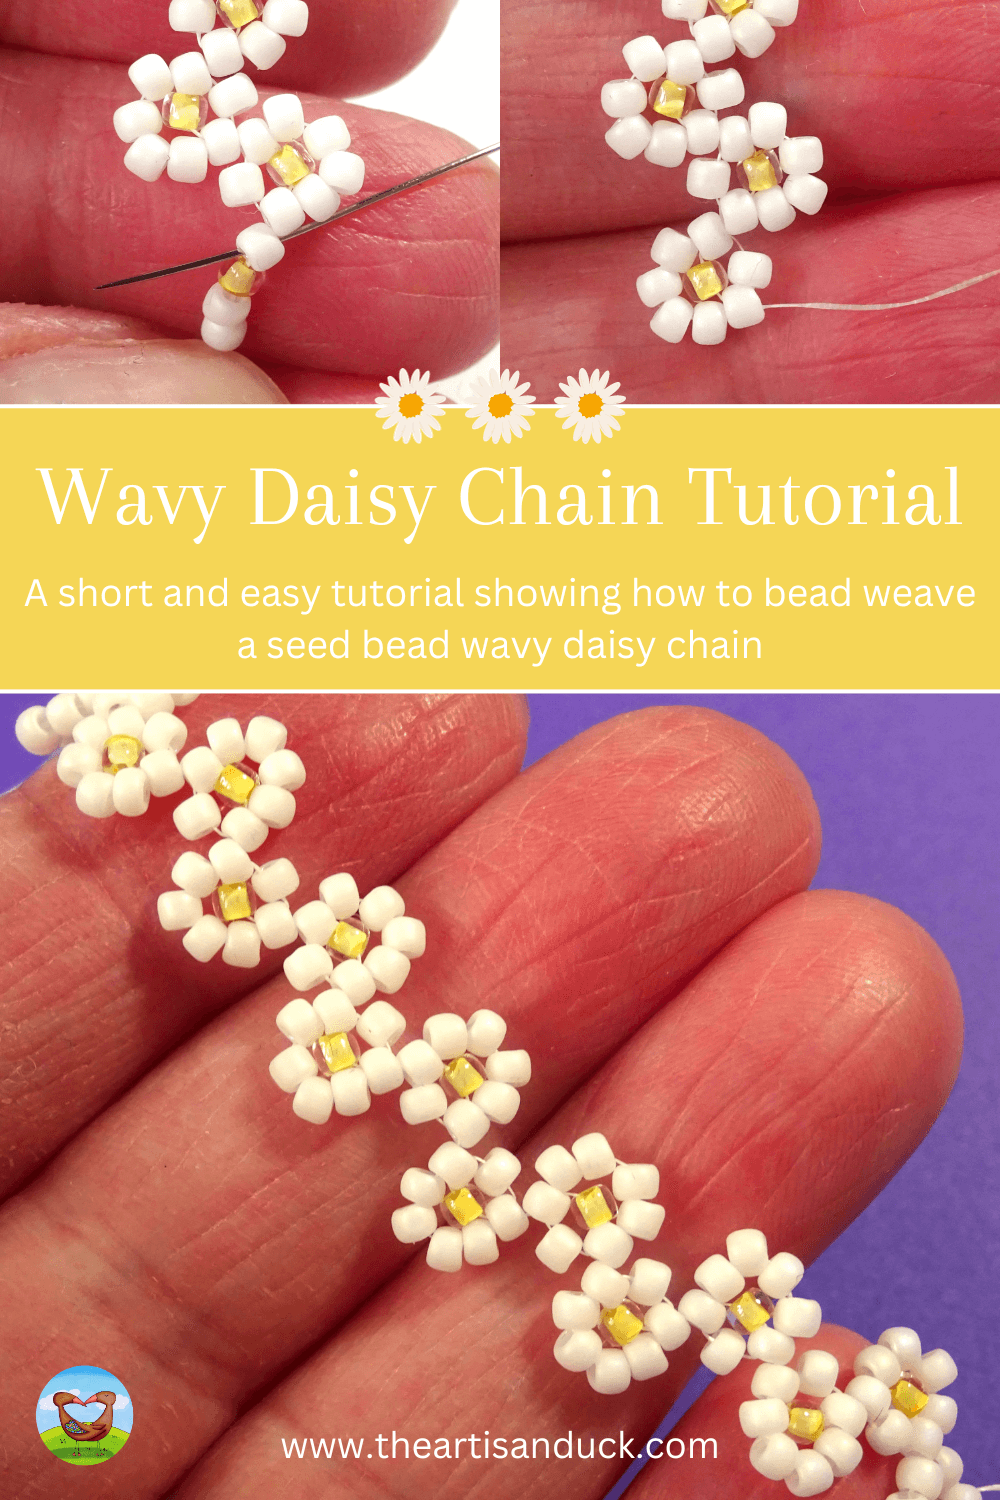 How to Make a Daisy Chain Beading Stitch